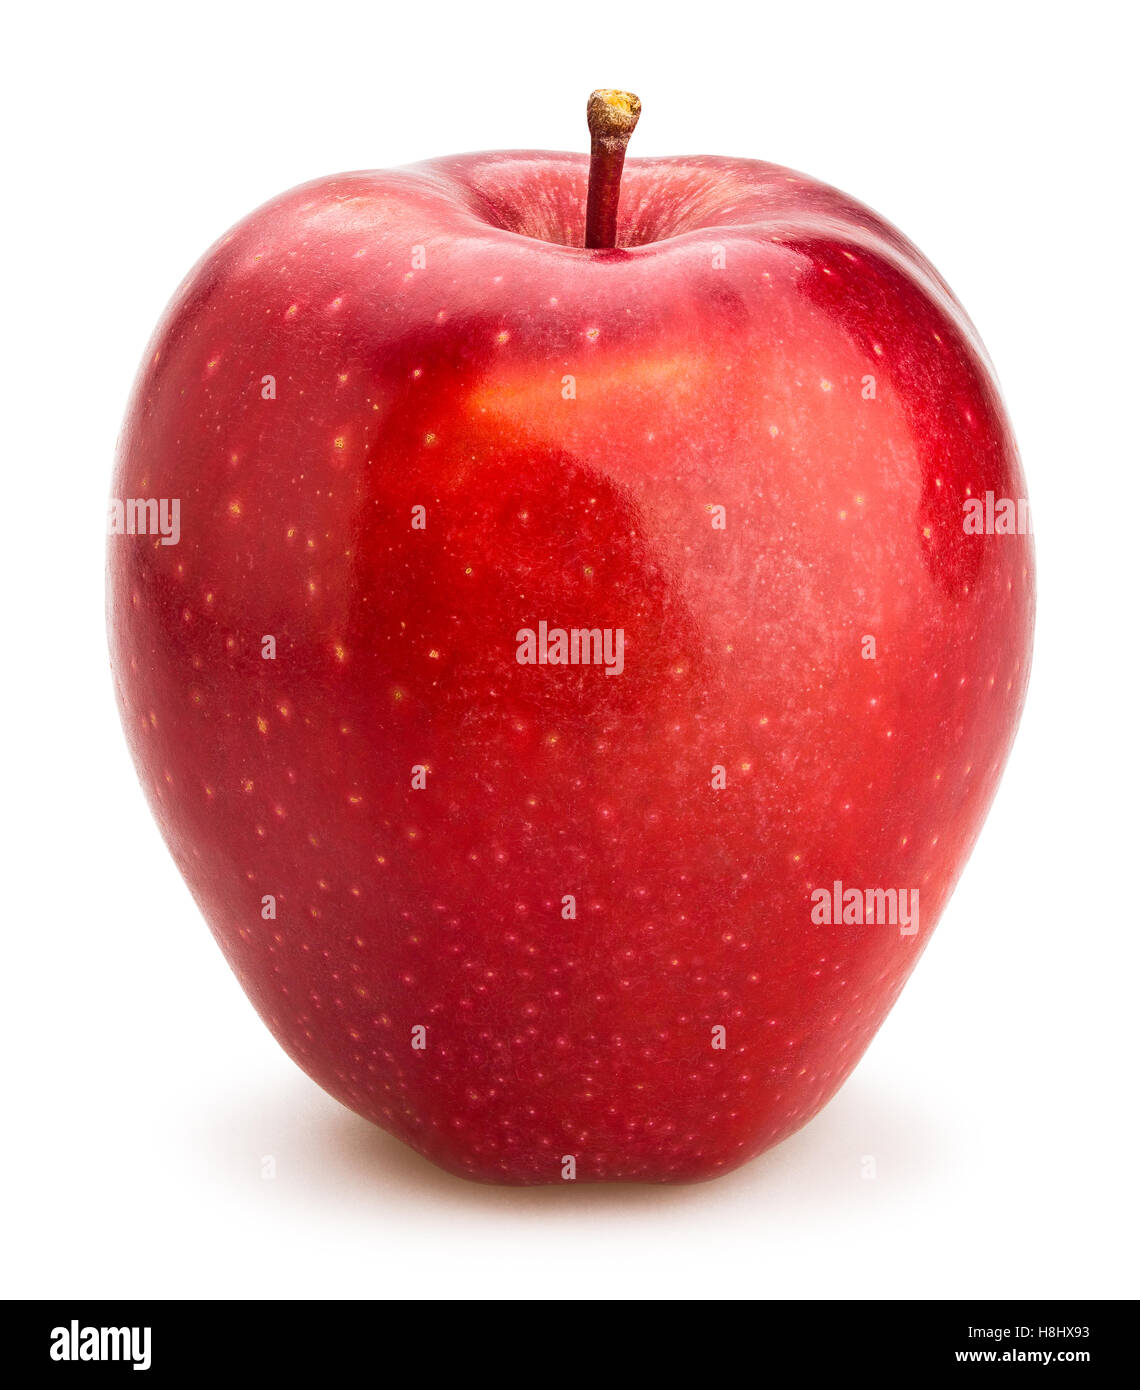 red delicious apple isolated Stock Photo